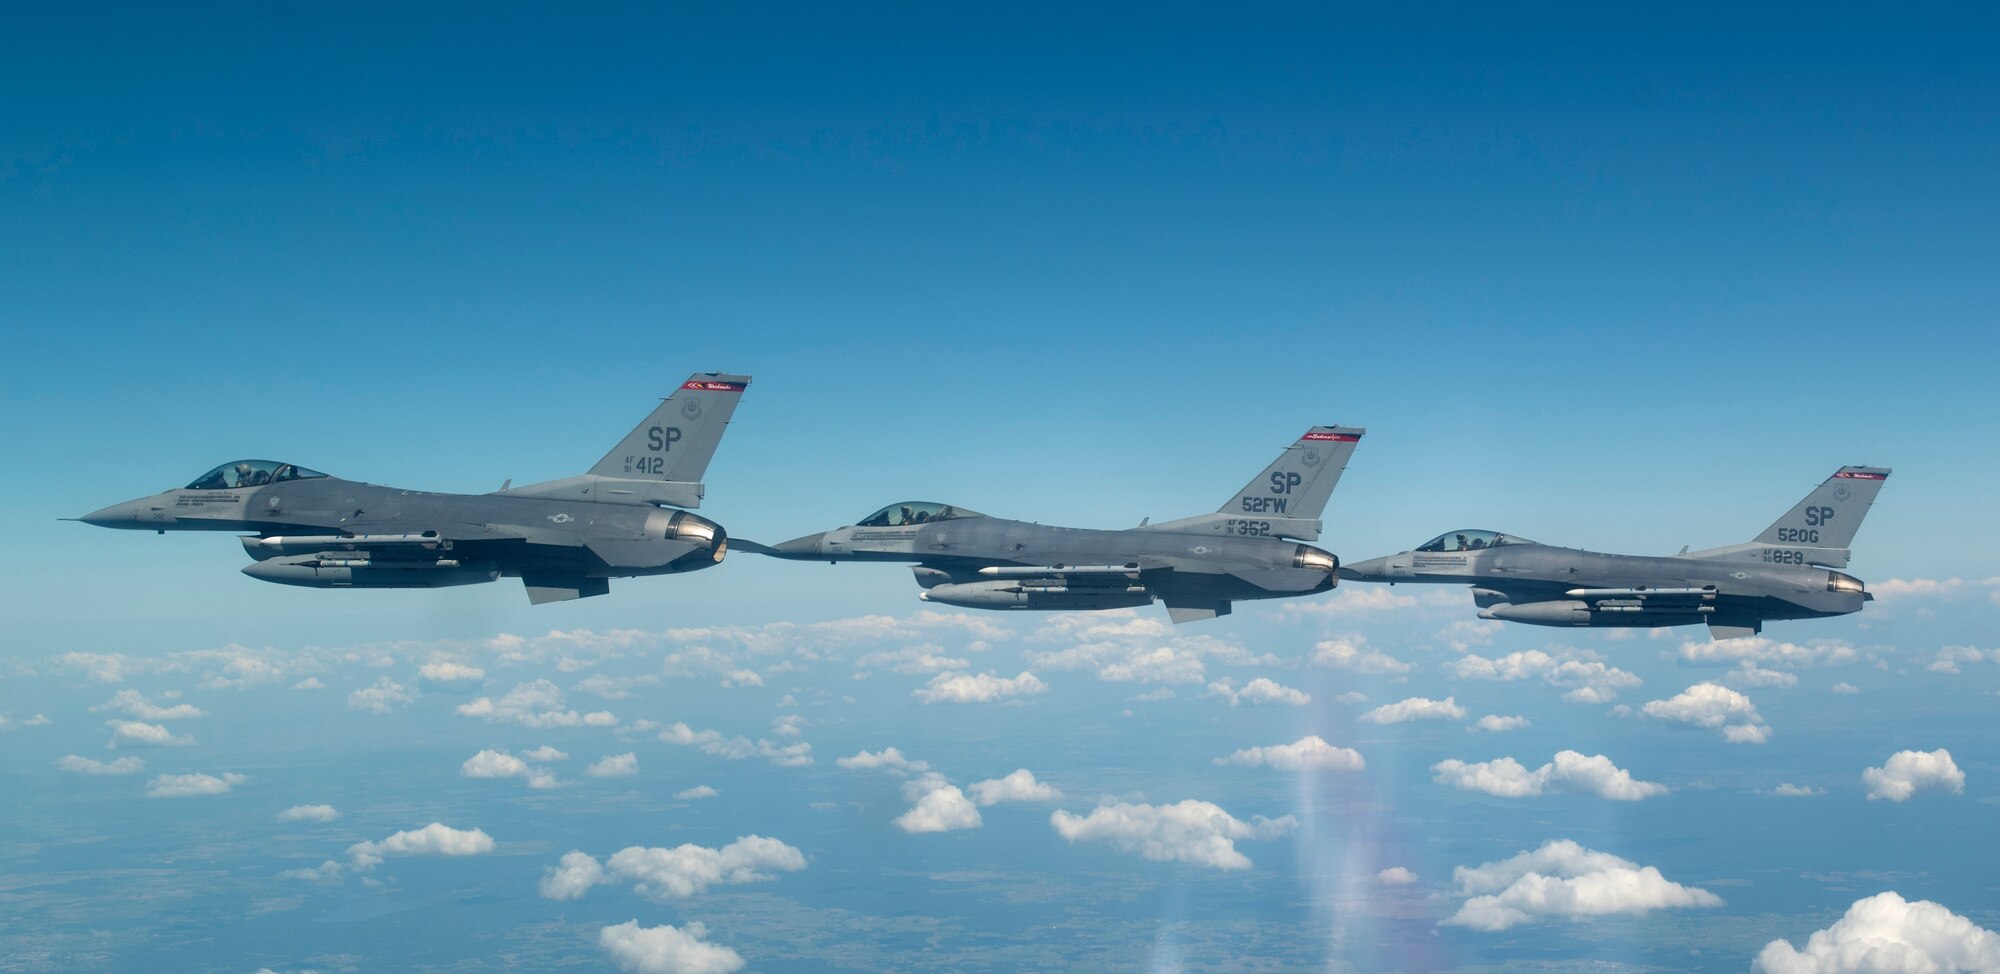 U.S. Air Force F-16 Fighting Falcons, assigned to the 480th Expeditionary Fighter Squadron, return to Lask Air Base, Poland after participating in Polish Armed Forces Day at Warsaw, Poland, August 15, 2020. The U.S. values their strong bilateral relationship with Poland and were honored to participate in the day’s ceremony and flyover. (U.S. Air Force photo by Senior Airman Chanceler Nardone)